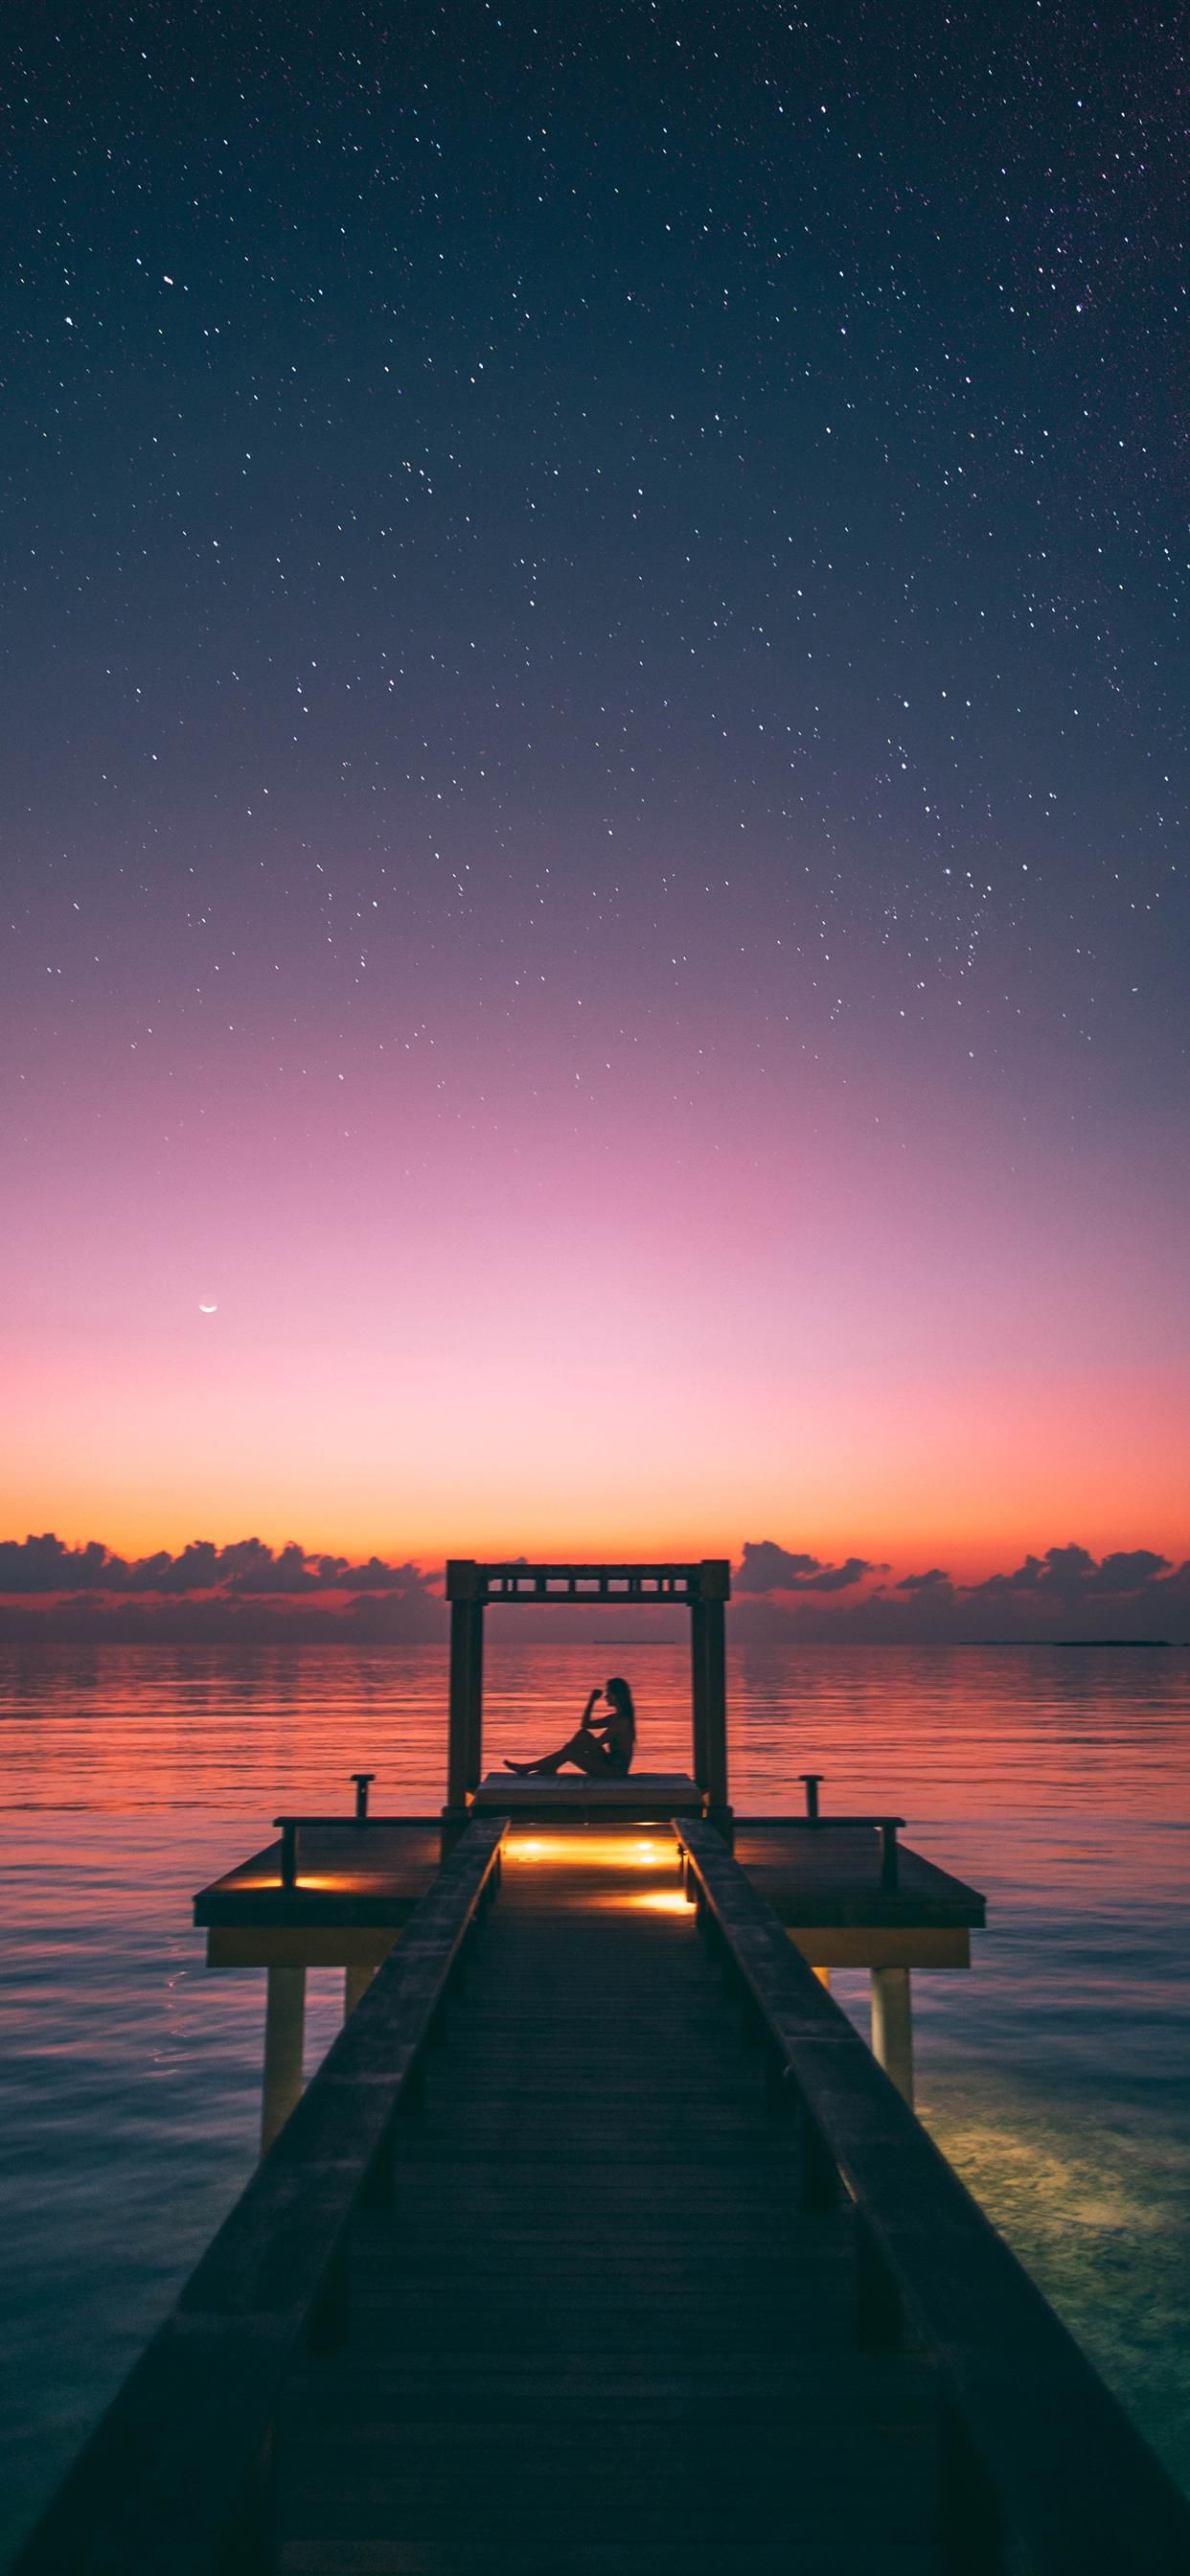 A starry night in the Maldives A surreal moment. iPhone X